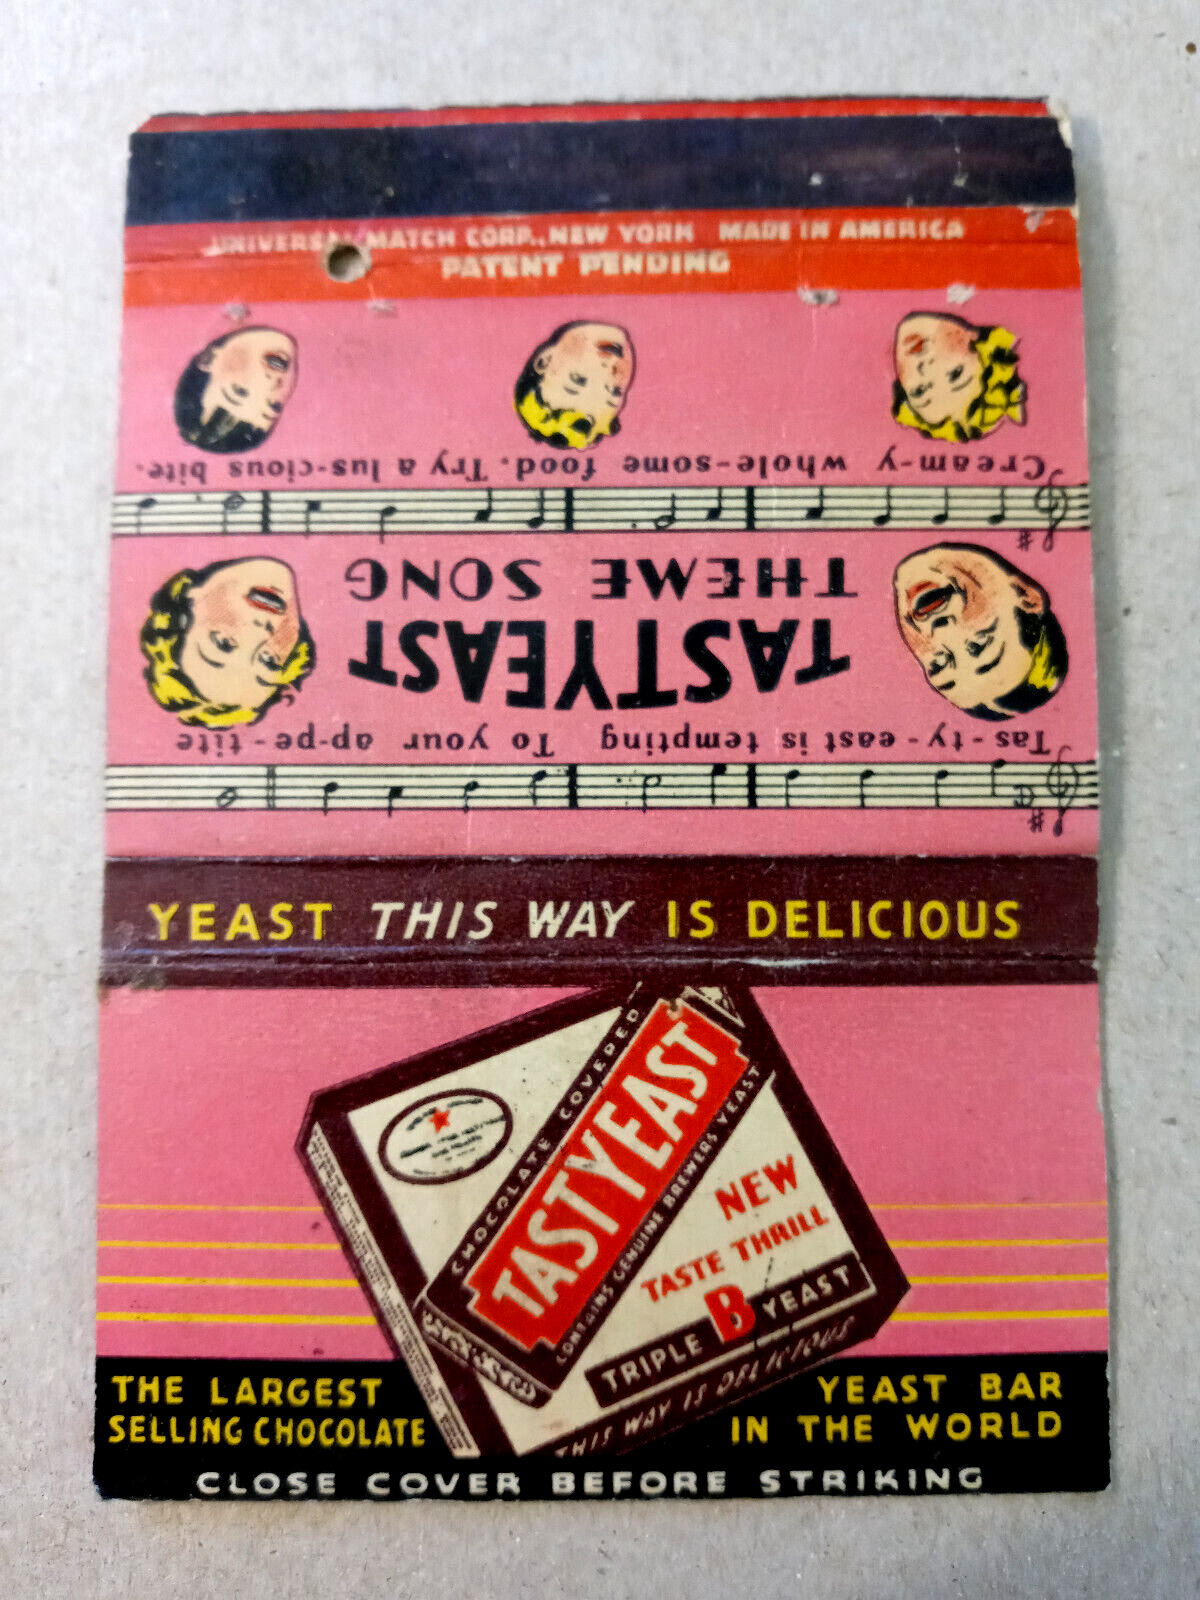 Vintage Matchbook: Tastyeast Chocolate Covered Yeast Snack, Springfied, MA